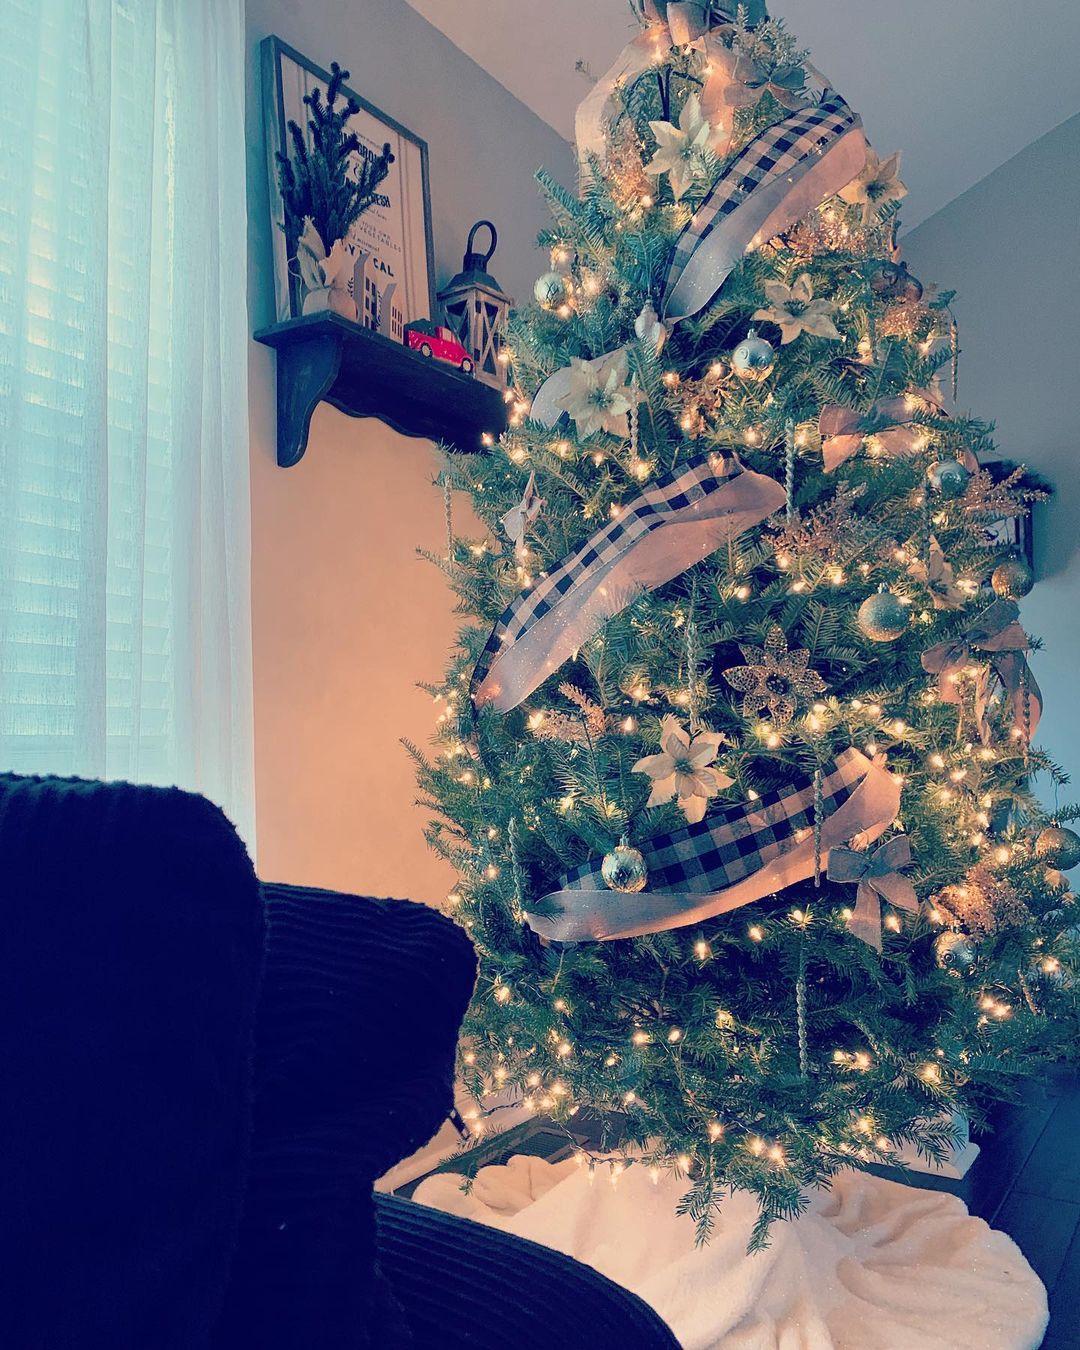 Got my tree up today and it’s finally starting to feel like Christmas in our hou...